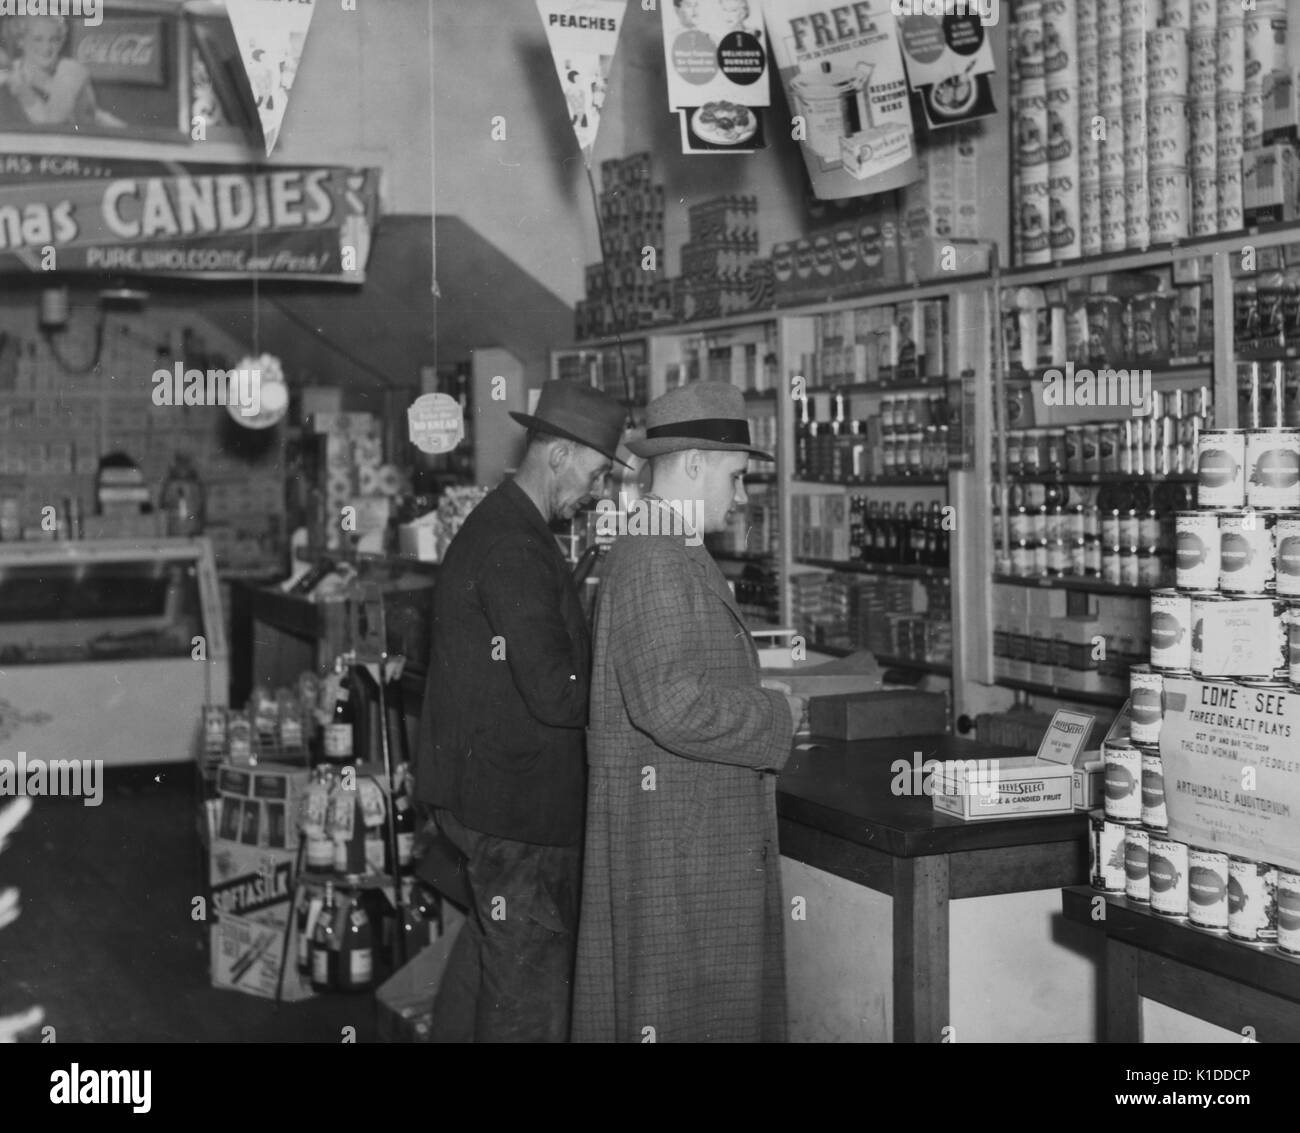 Men in suits shopping at cooperative store of Arthurdale project in Reedsville, West Virginia, Virginia, 1936. From the New York Public Library. Stock Photo